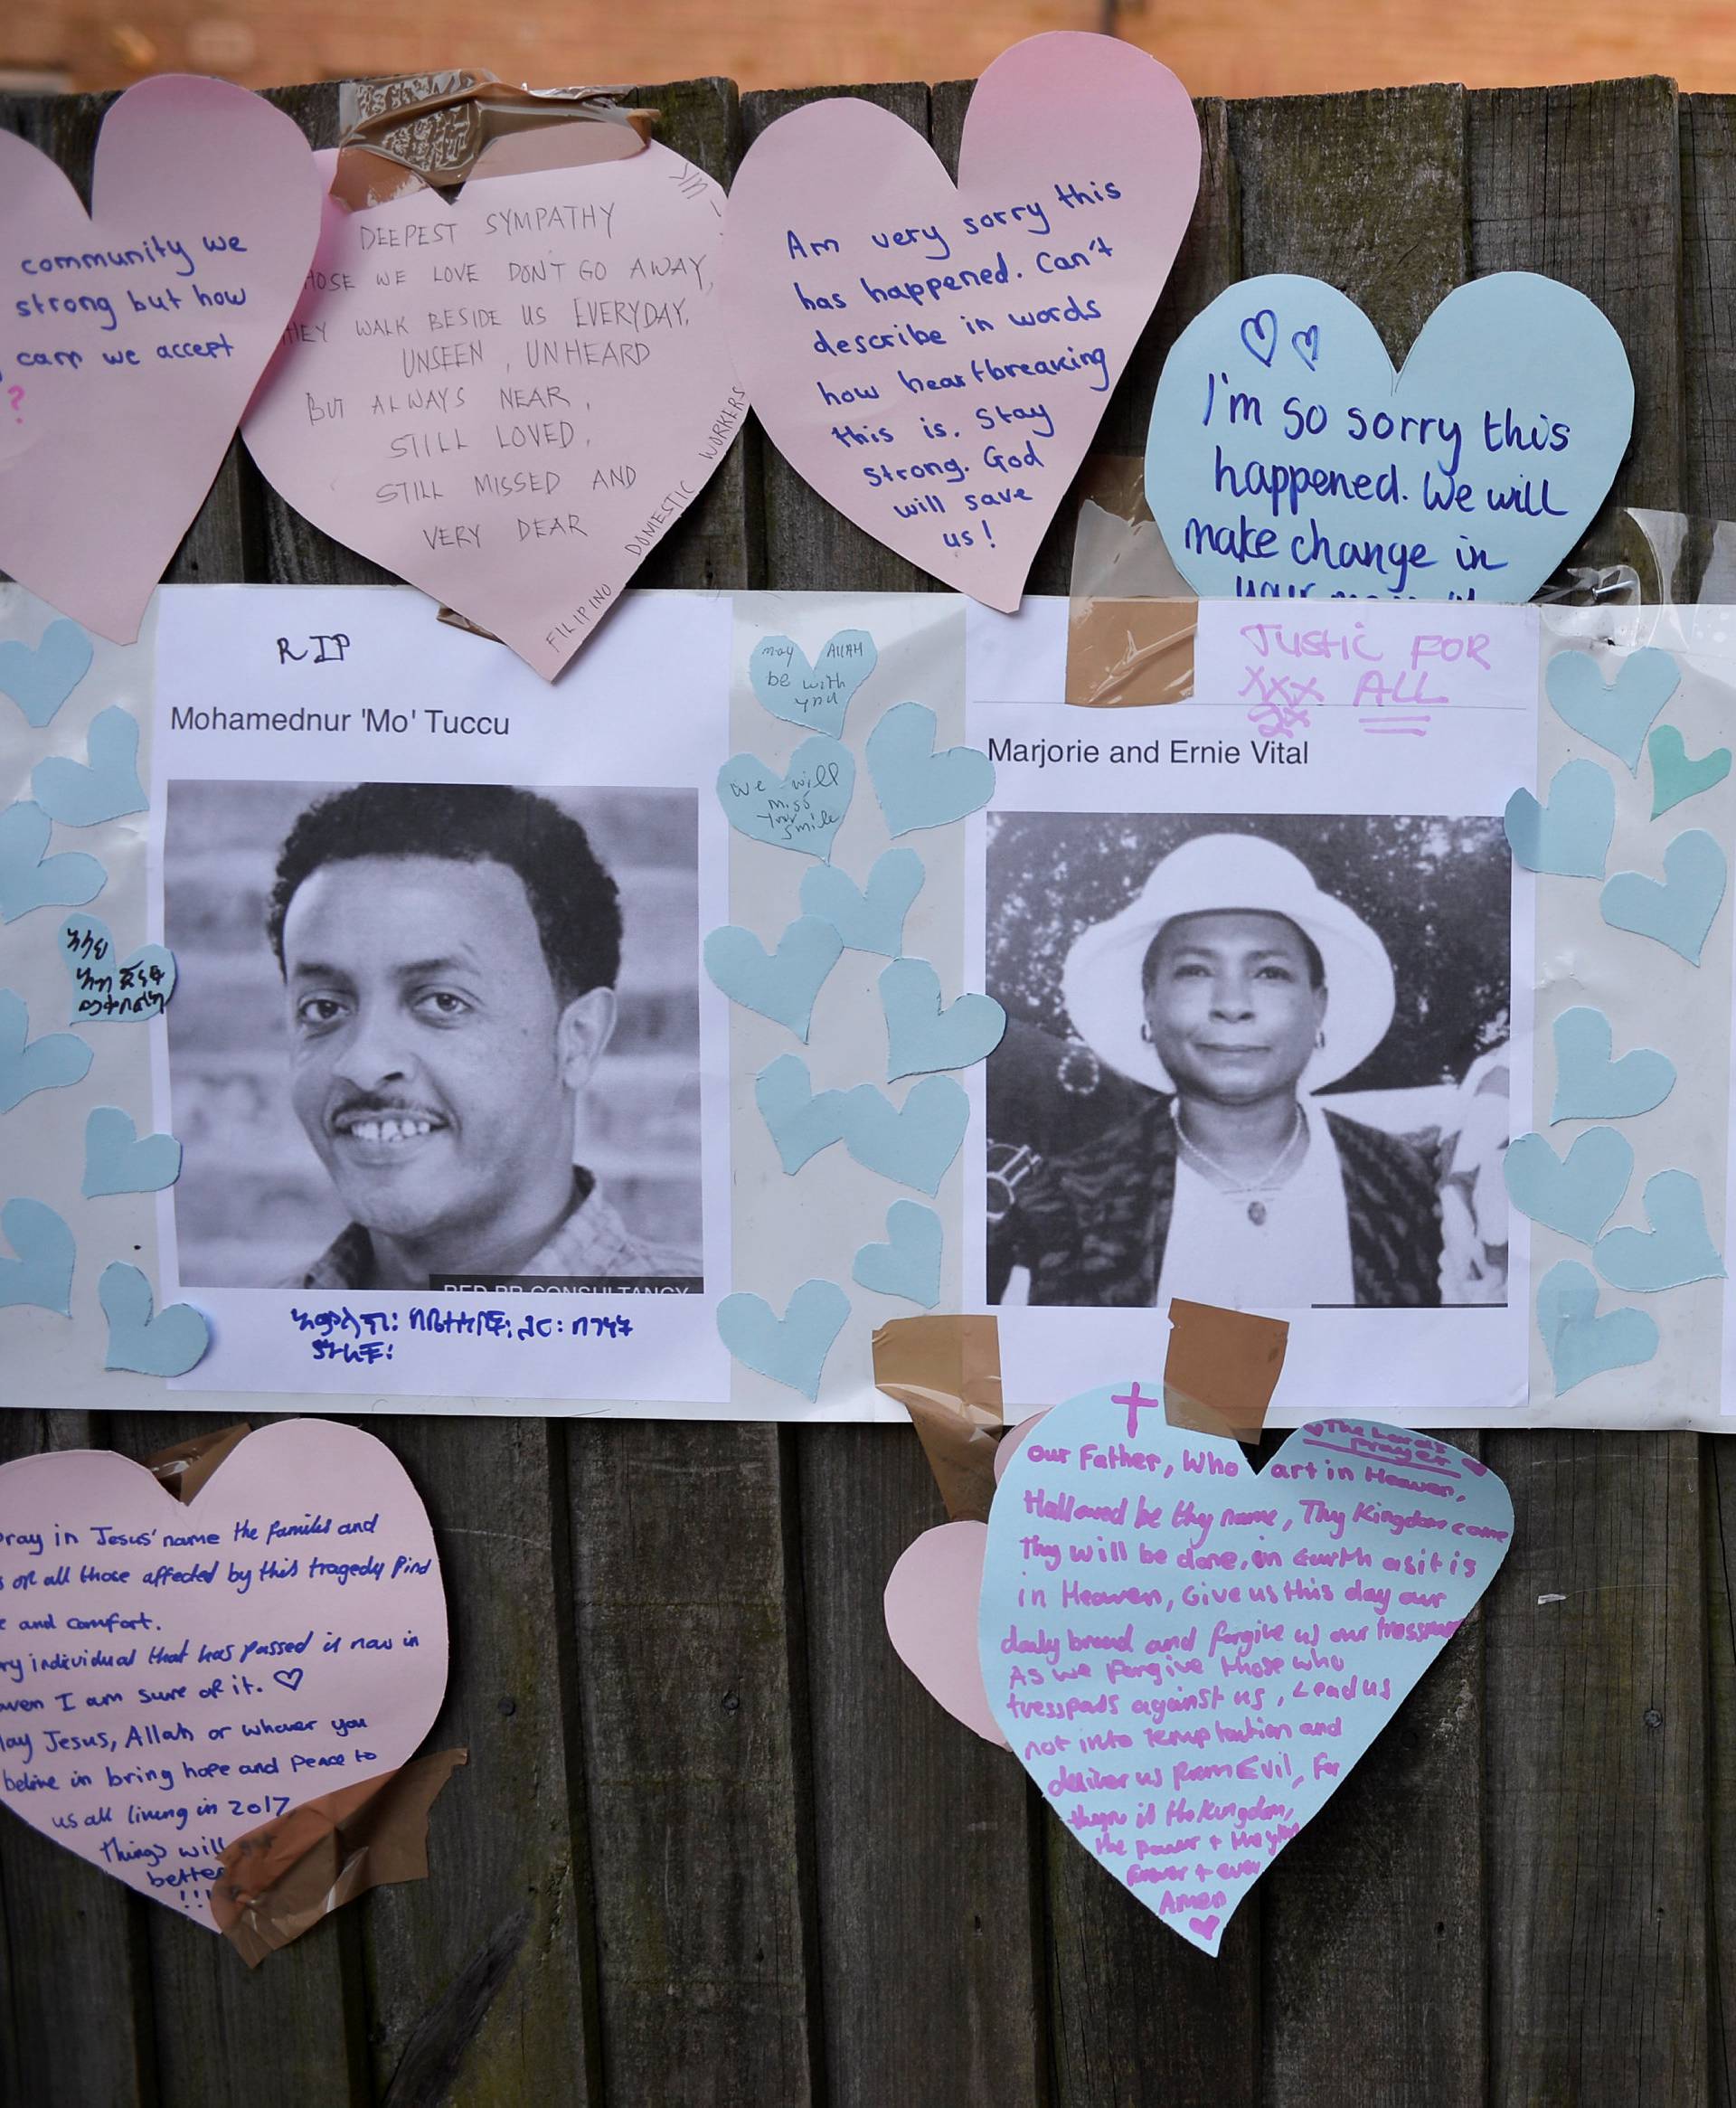 Home made posters appealing for information on people missing since the Grenfell apartment tower block caught fire are seen next to messages of sympathy in North Kensington, London